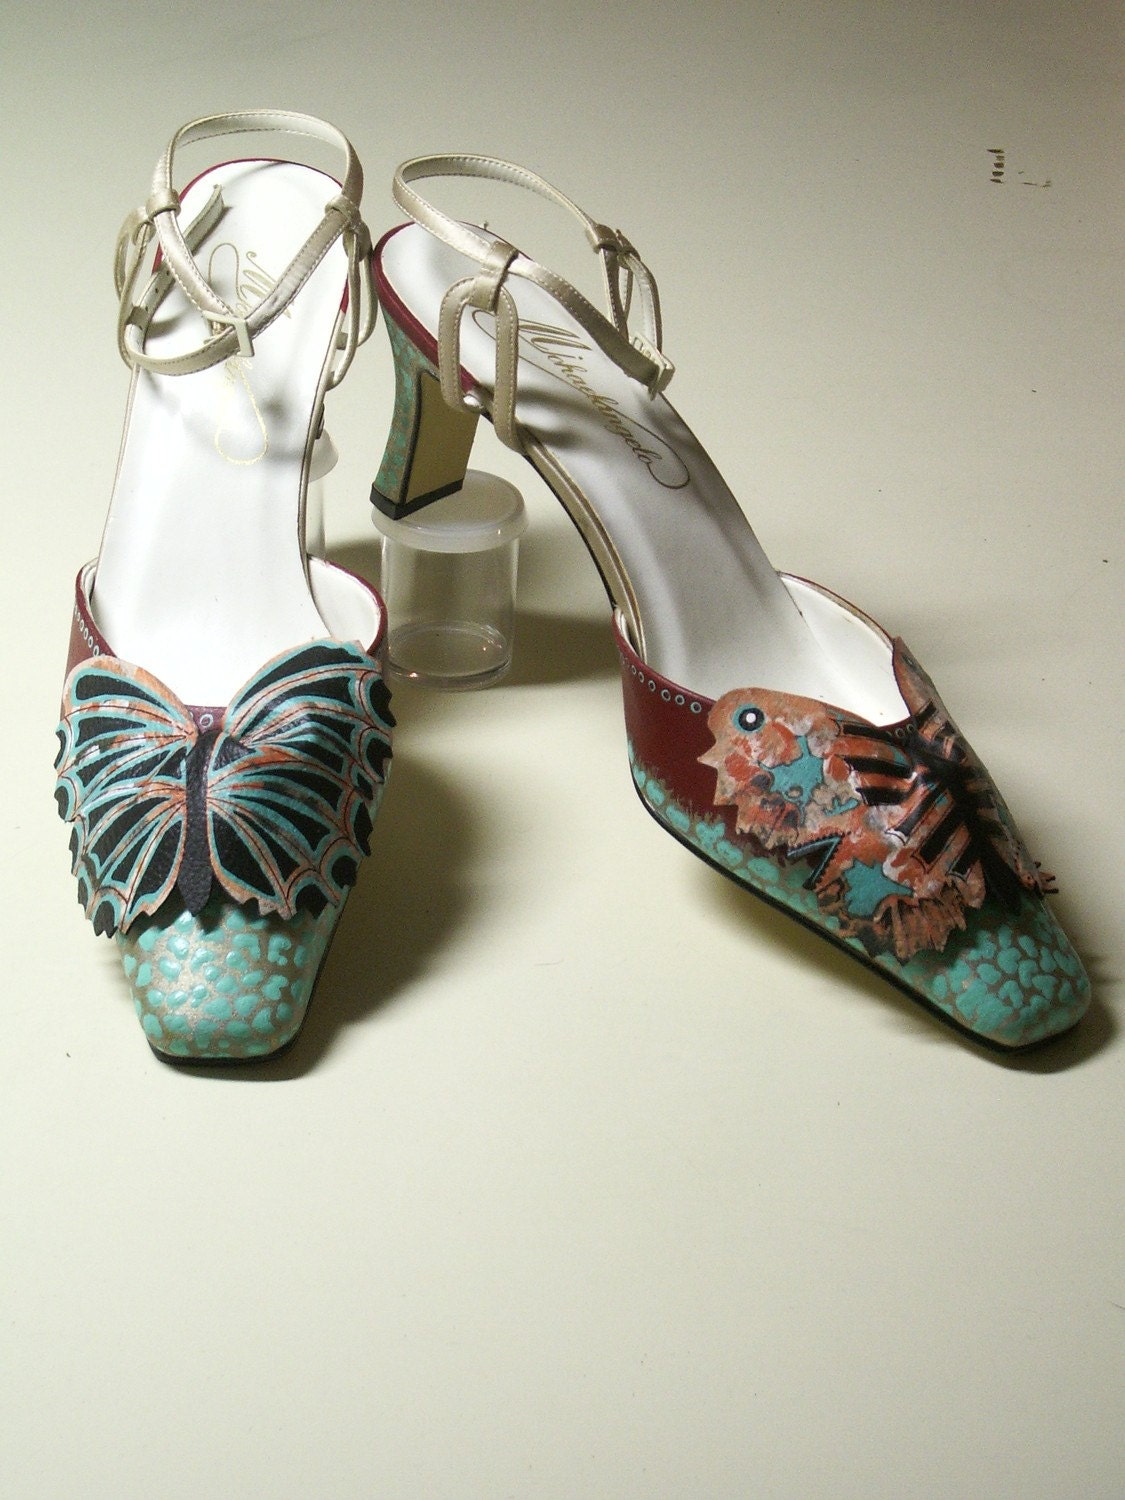 SALE 40 off Butterfly Shoes Hand Painted Satin Cracchiolo Designs Size 912